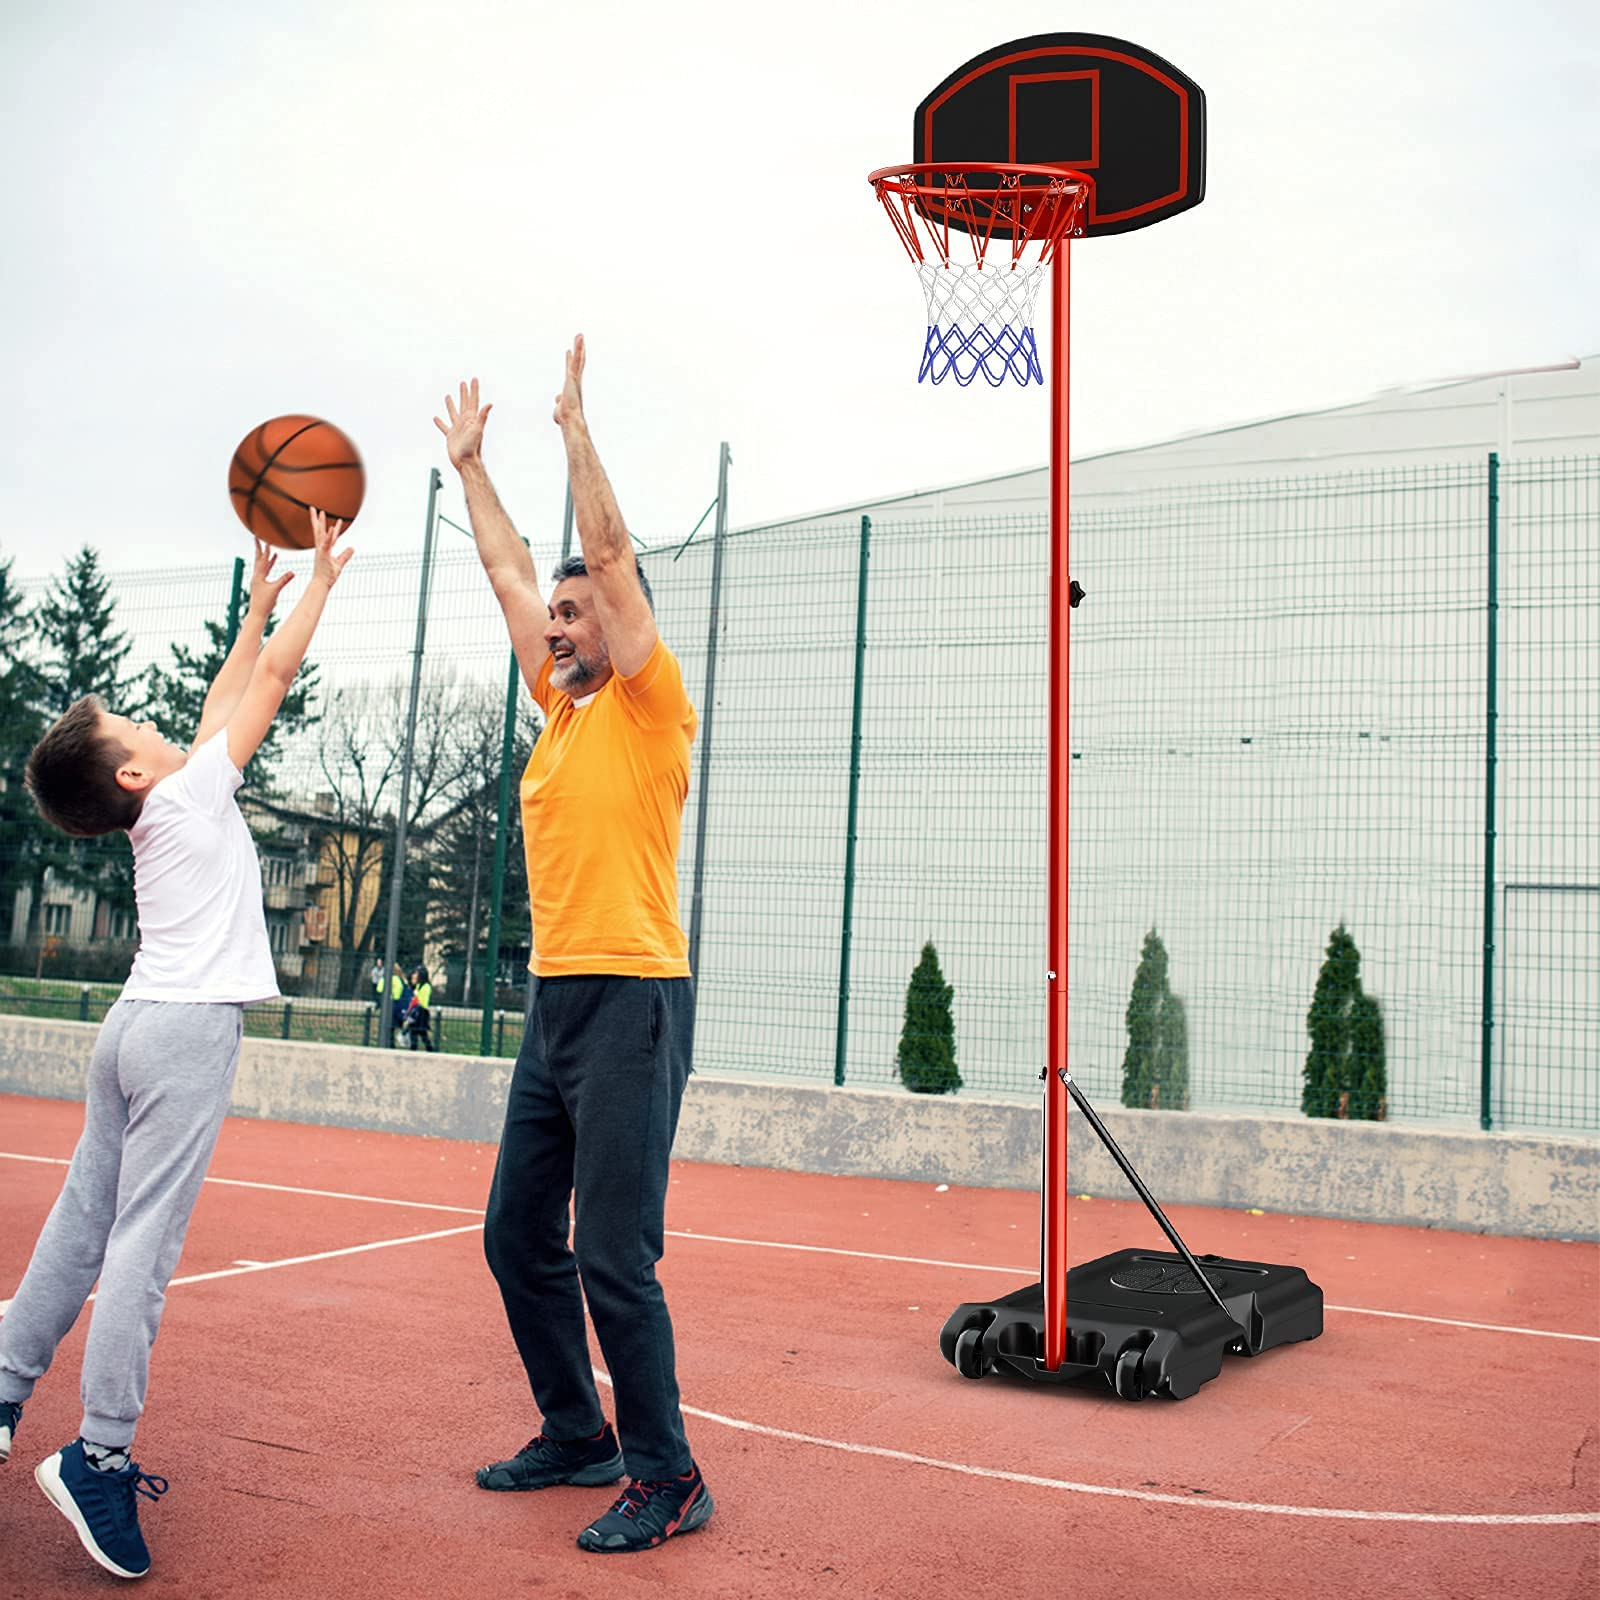 Giantex Portable Basketball Hoop Adjustable Height 6.5 - 8.5 FT, Backboard System Stand with 2 Wheels